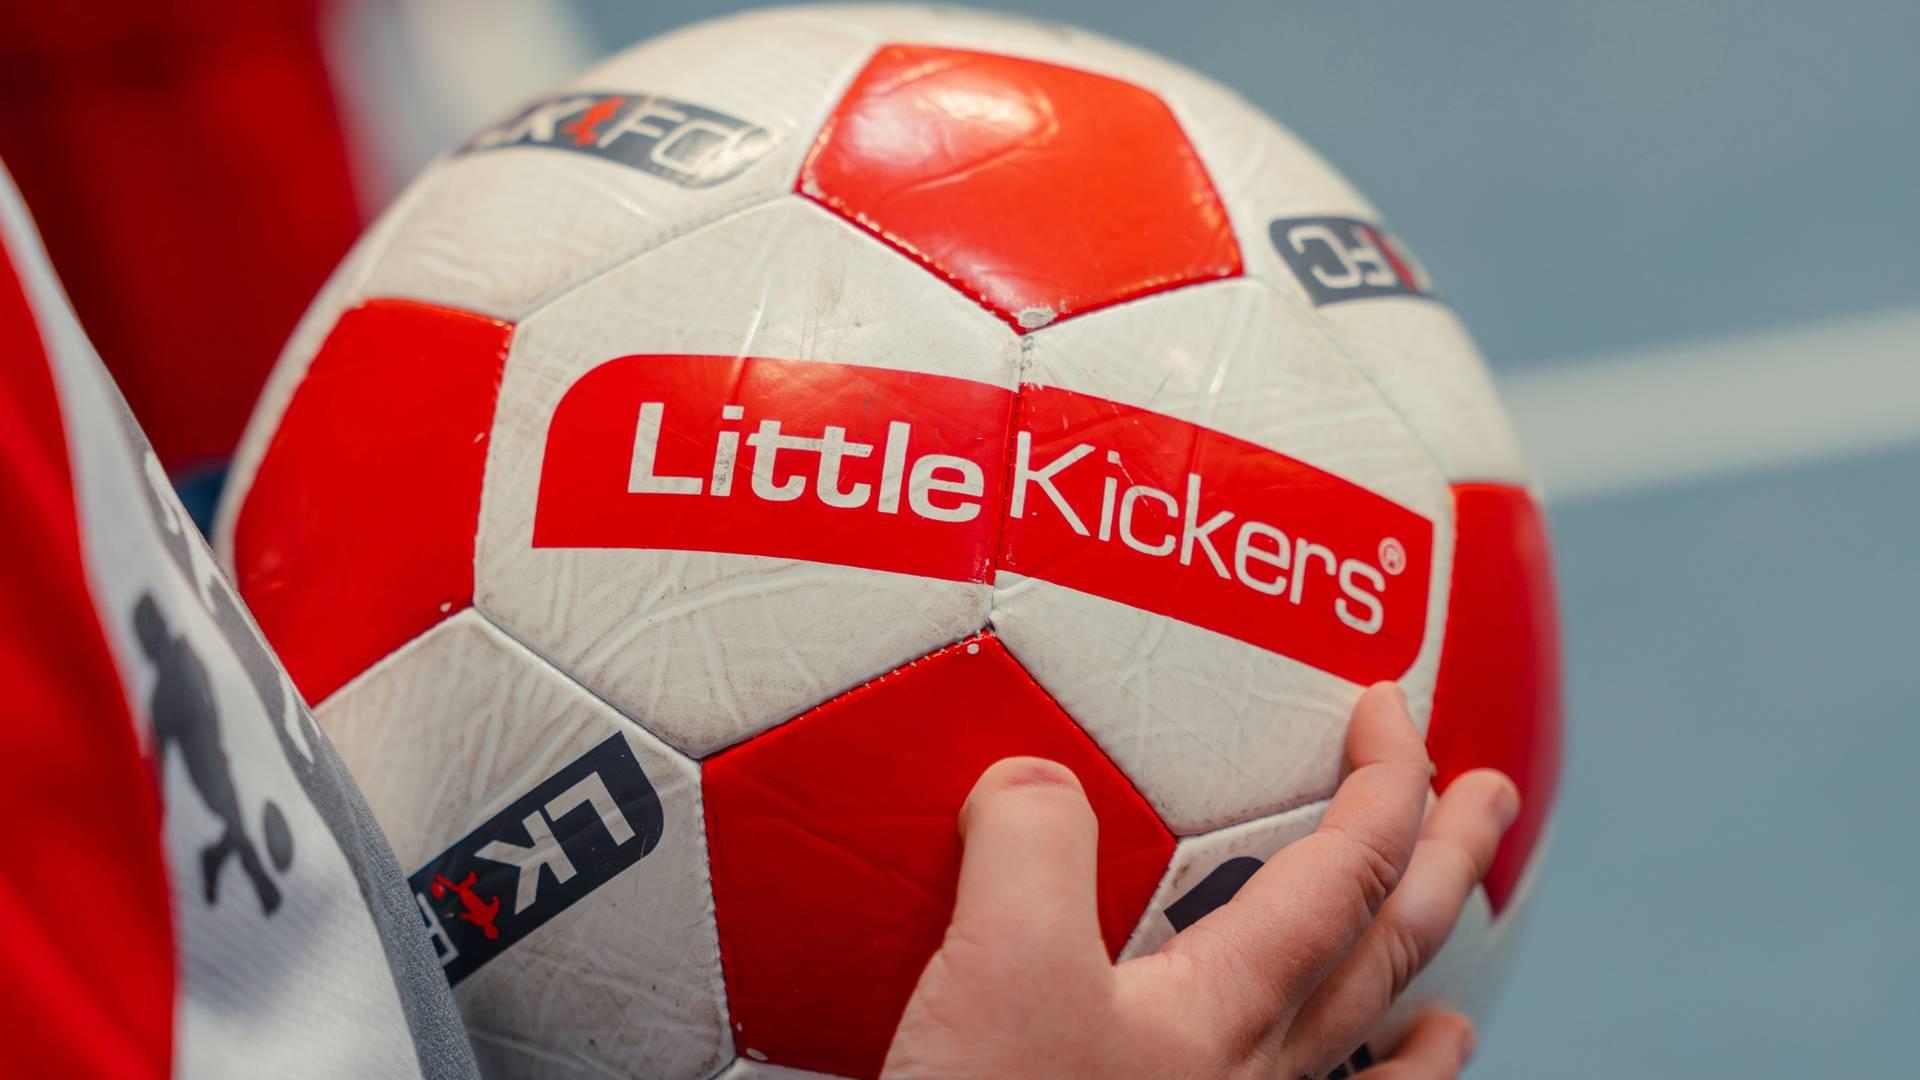 Little Kickers Football Classes  - Winton, Bournemouth - 2.5 to 5 years photo